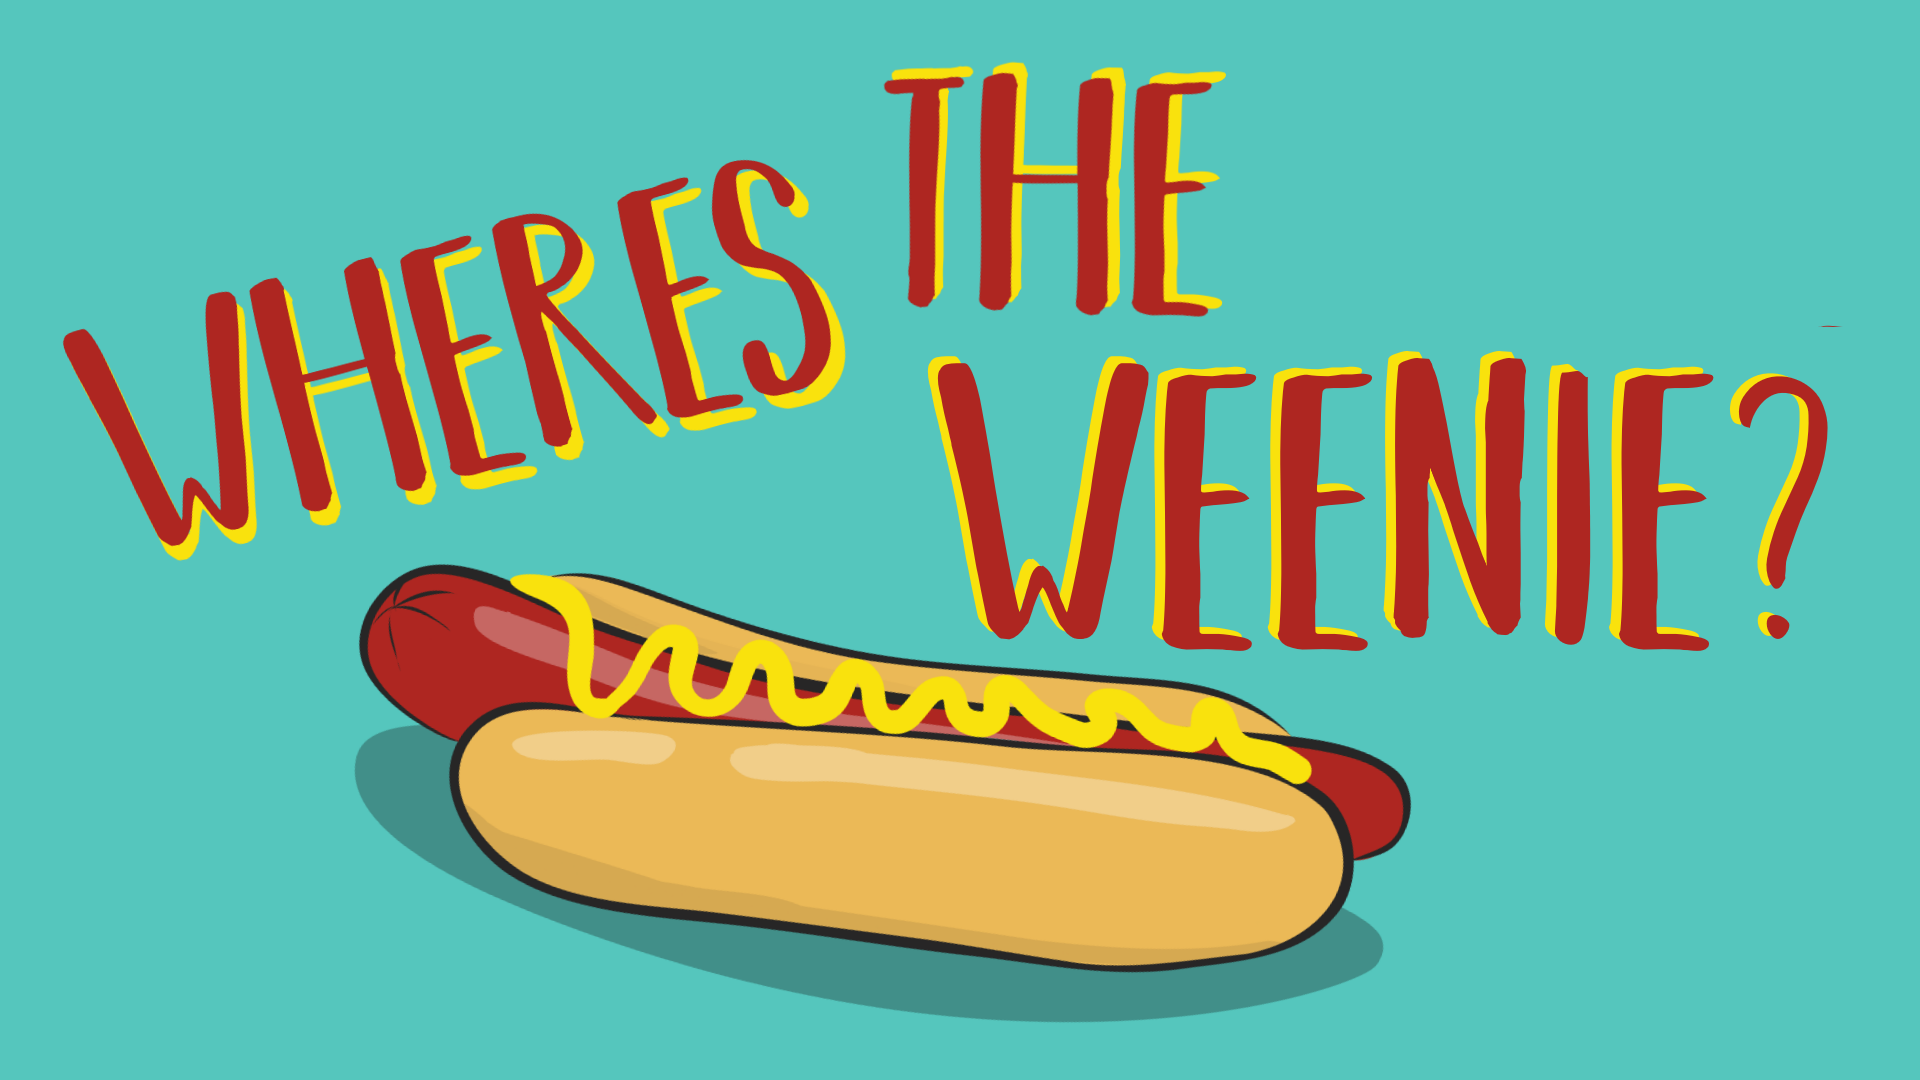 Wheres the weenie.png